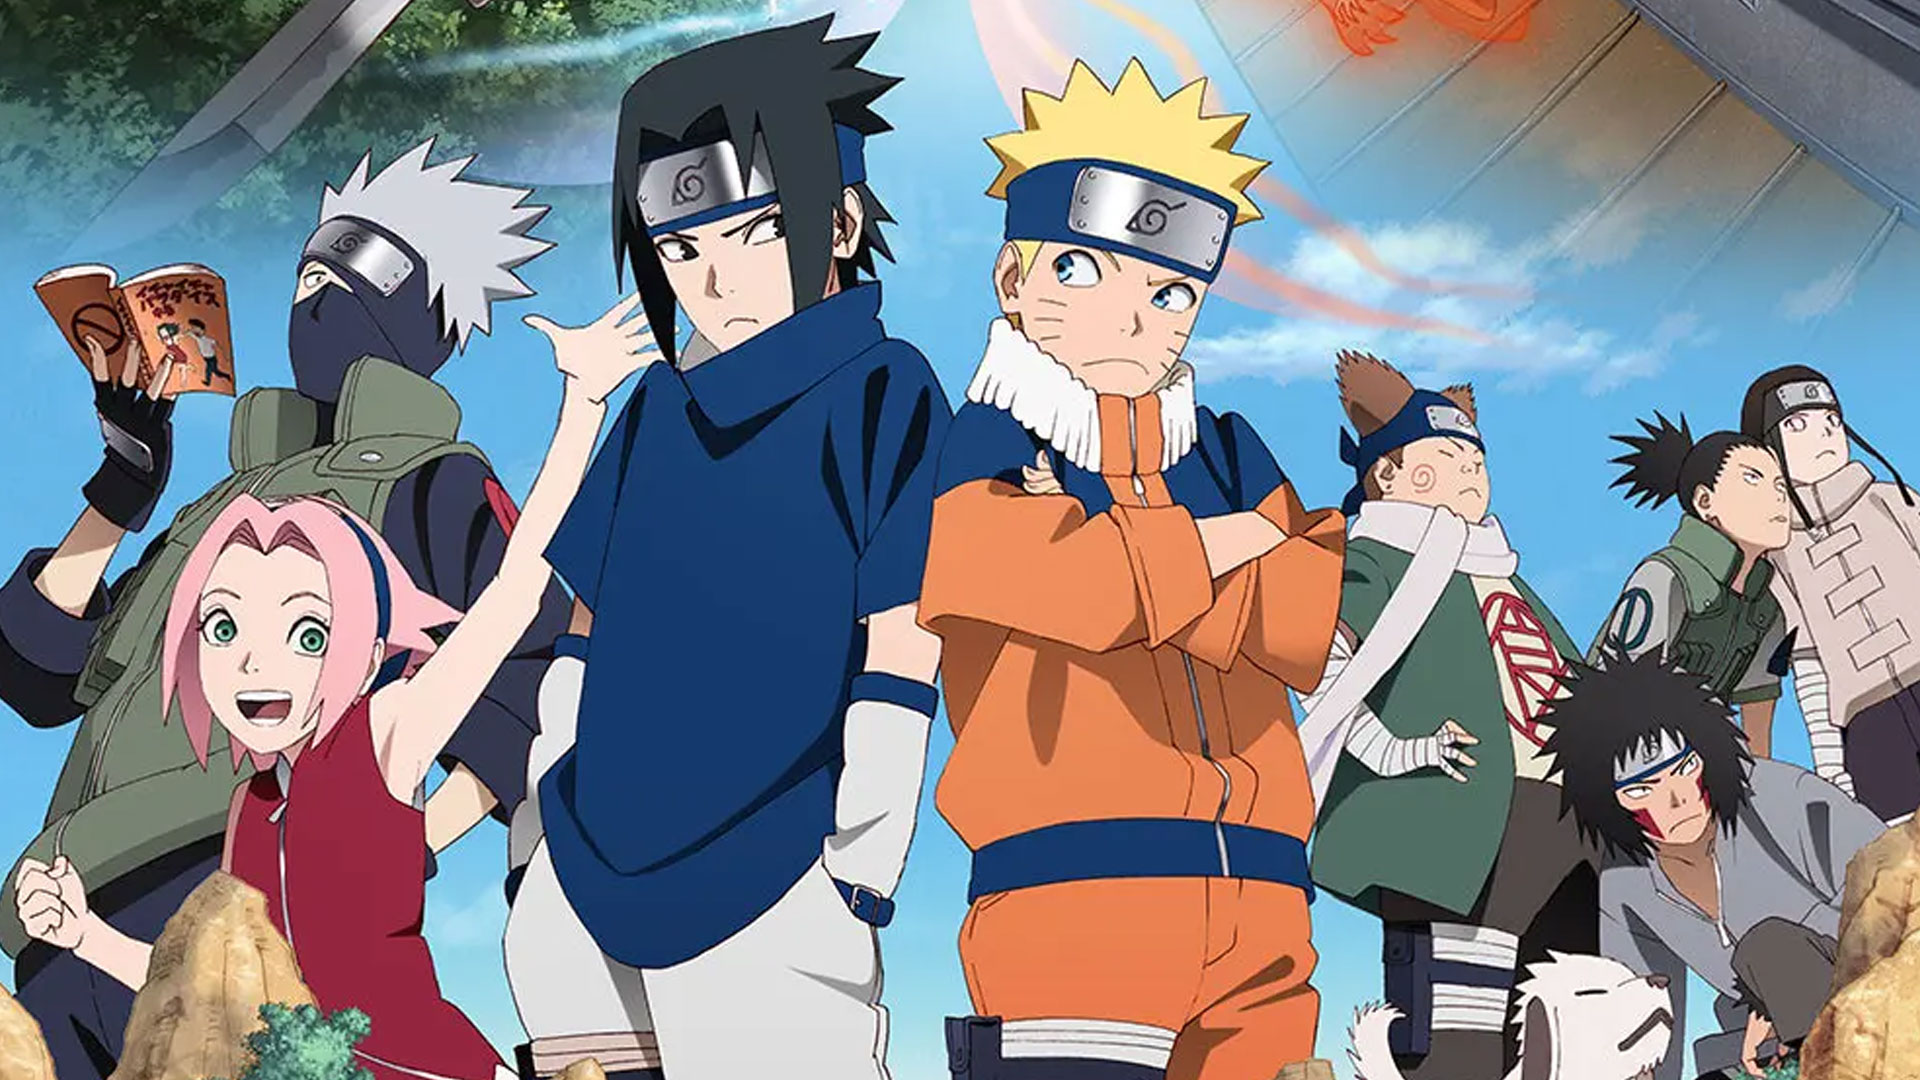 New Naruto Illustration is Great, but Where is the Anime Special?